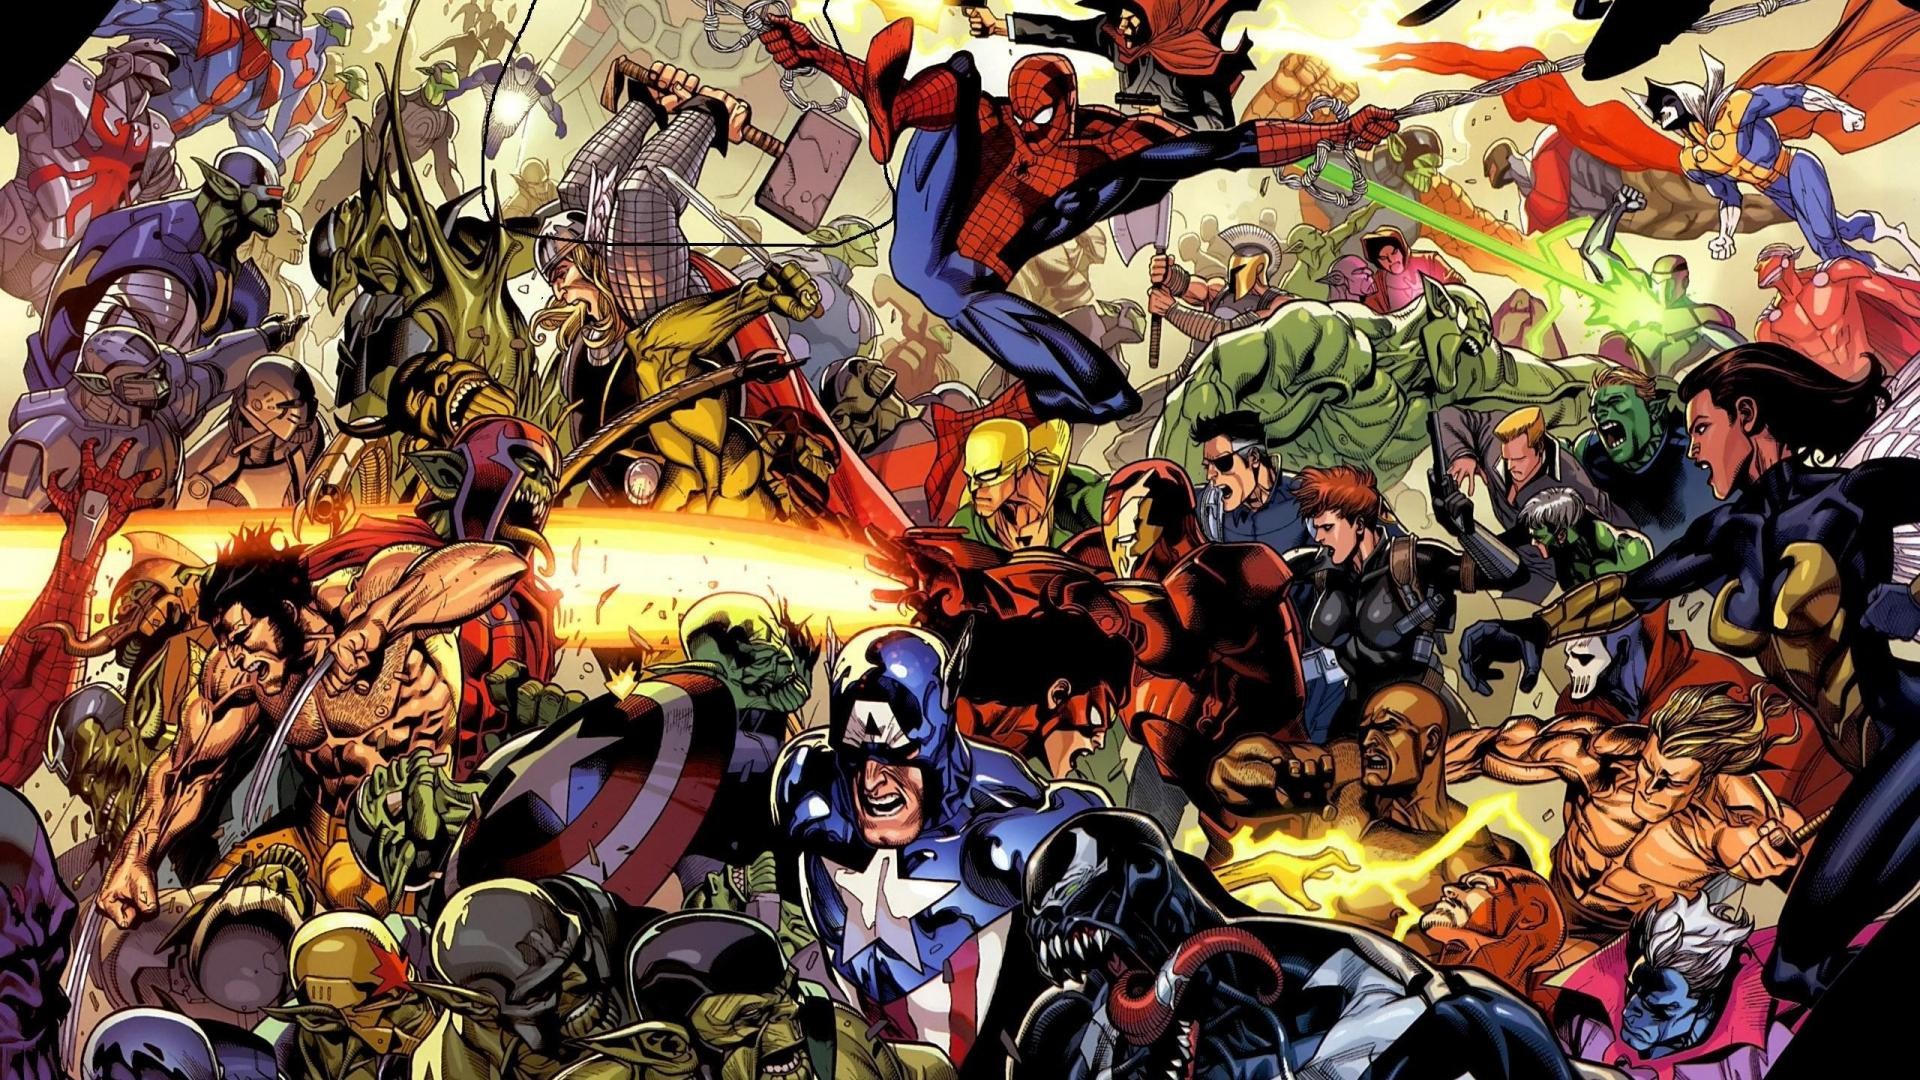 43+ Marvel wallpapers ·① Download free stunning full HD ...